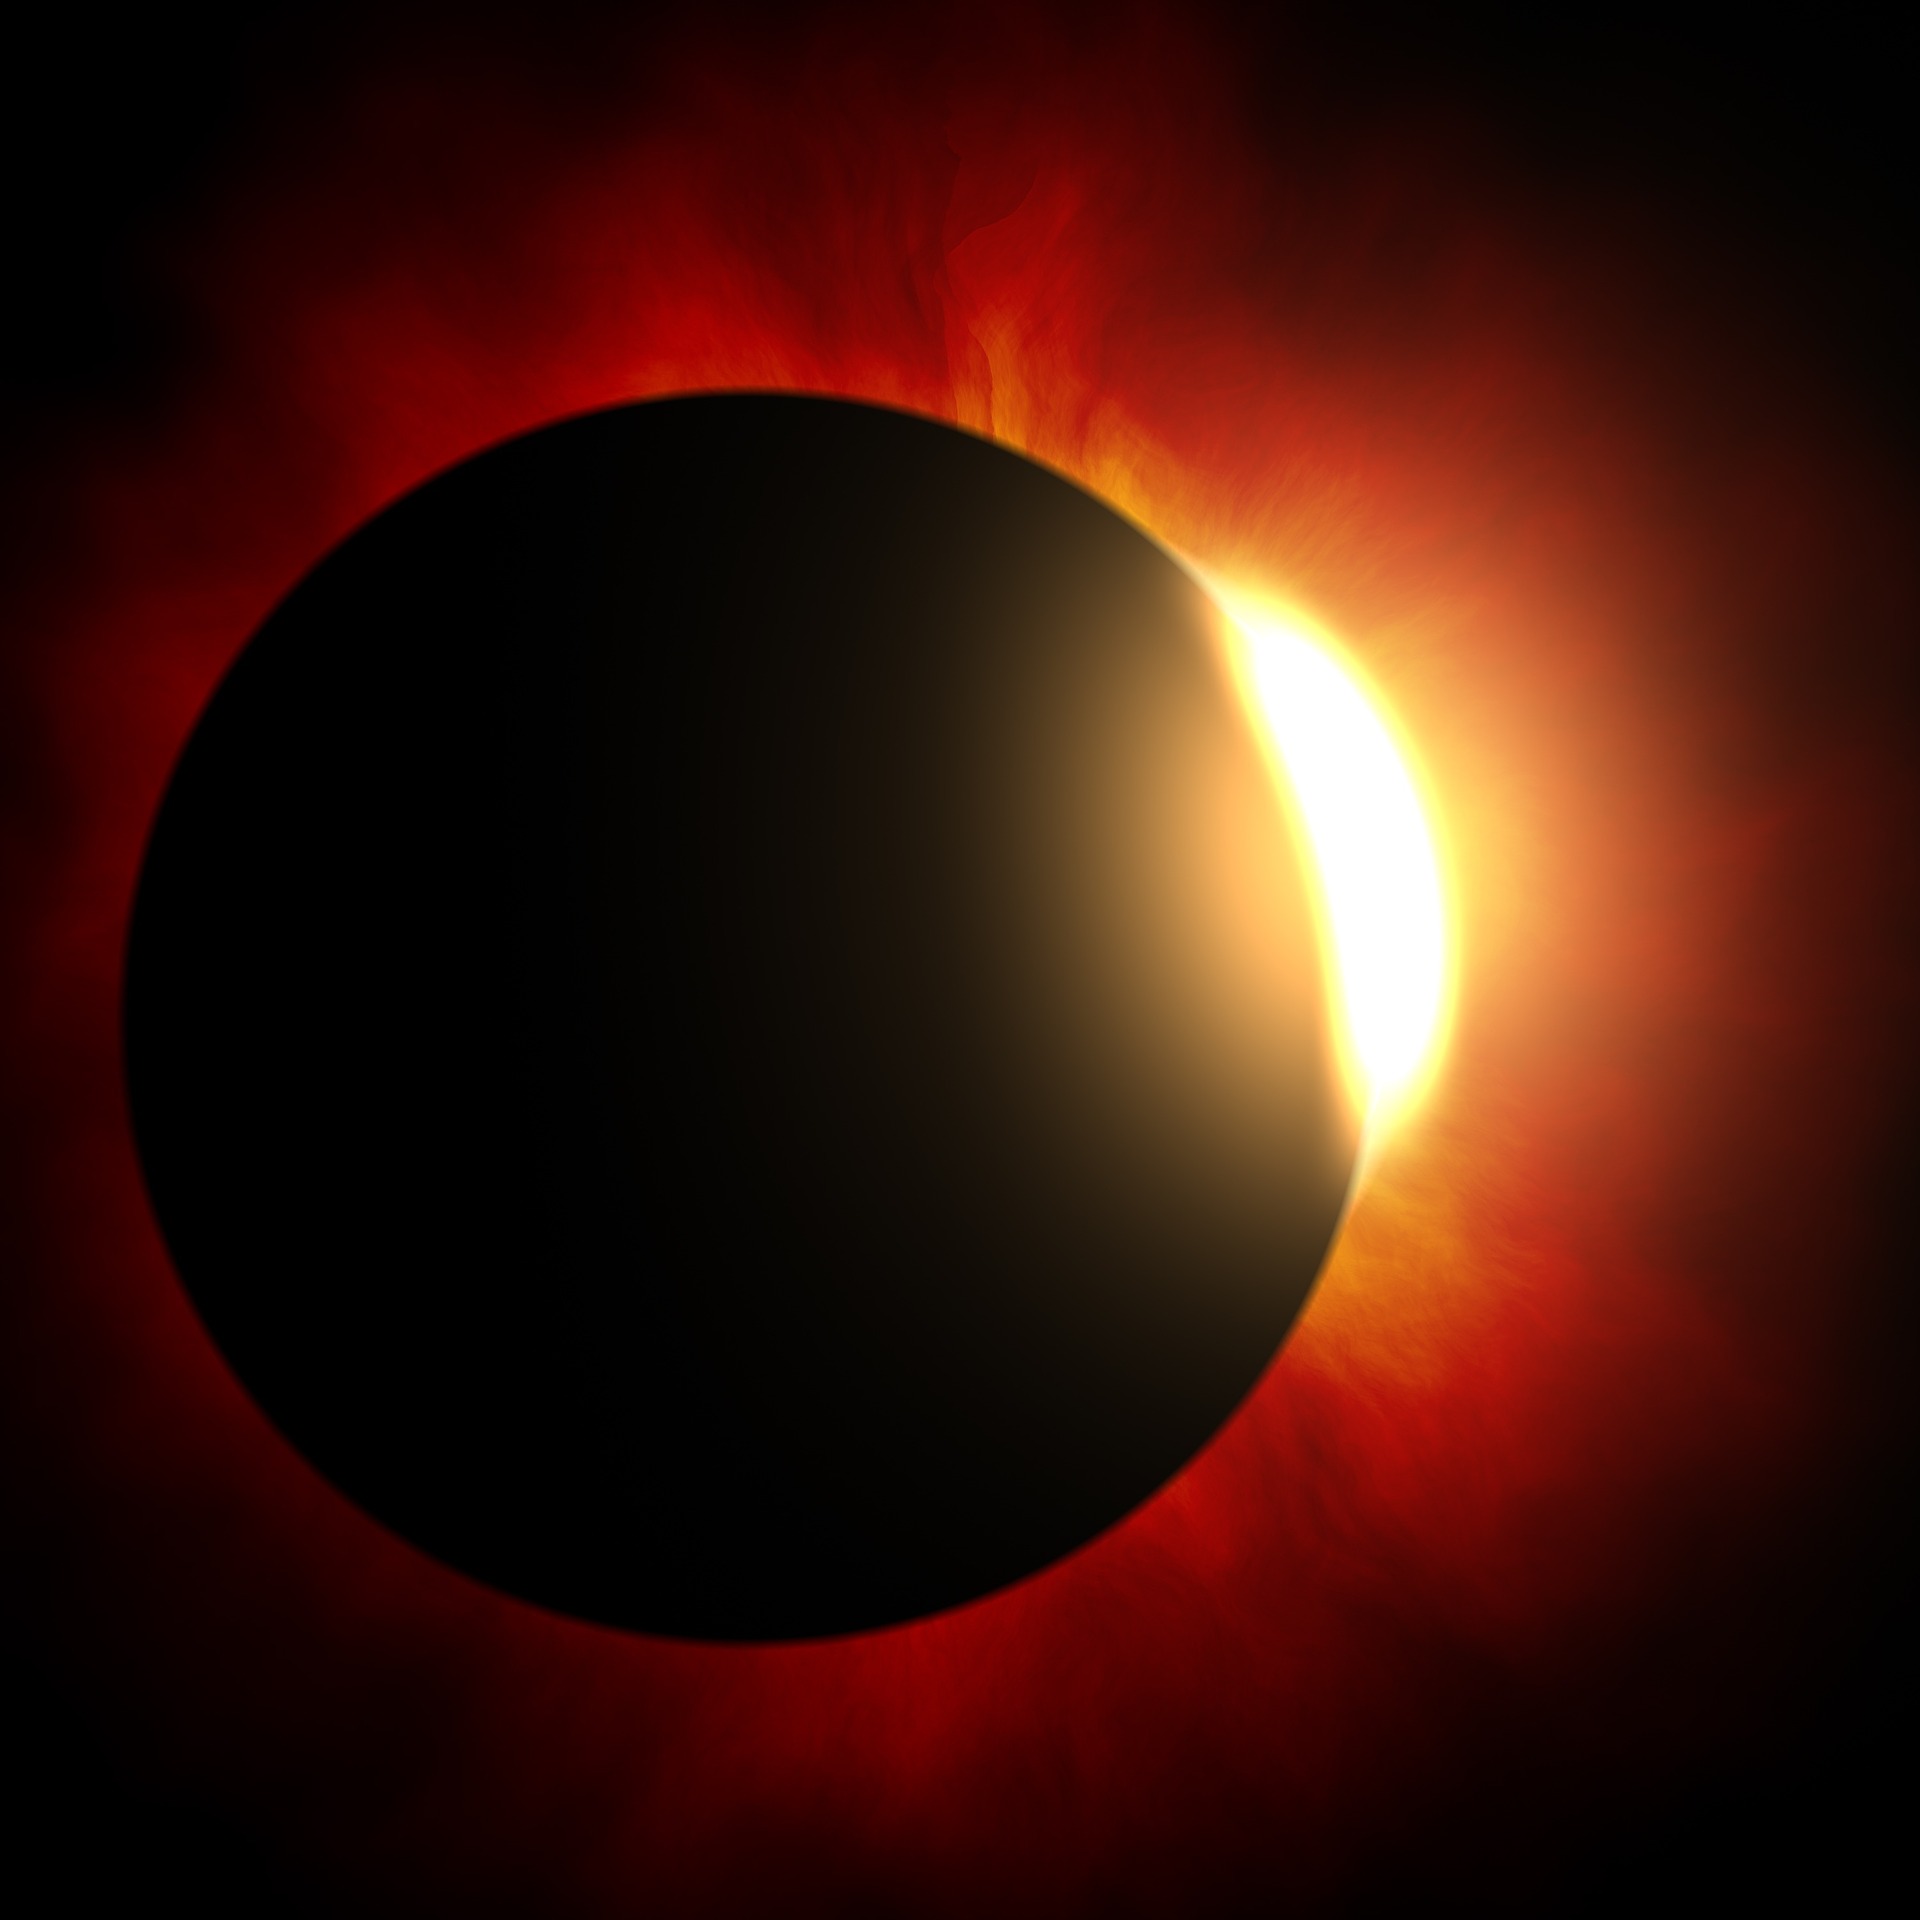 Come On! Witness a spectacular ring of fire solar eclipse today